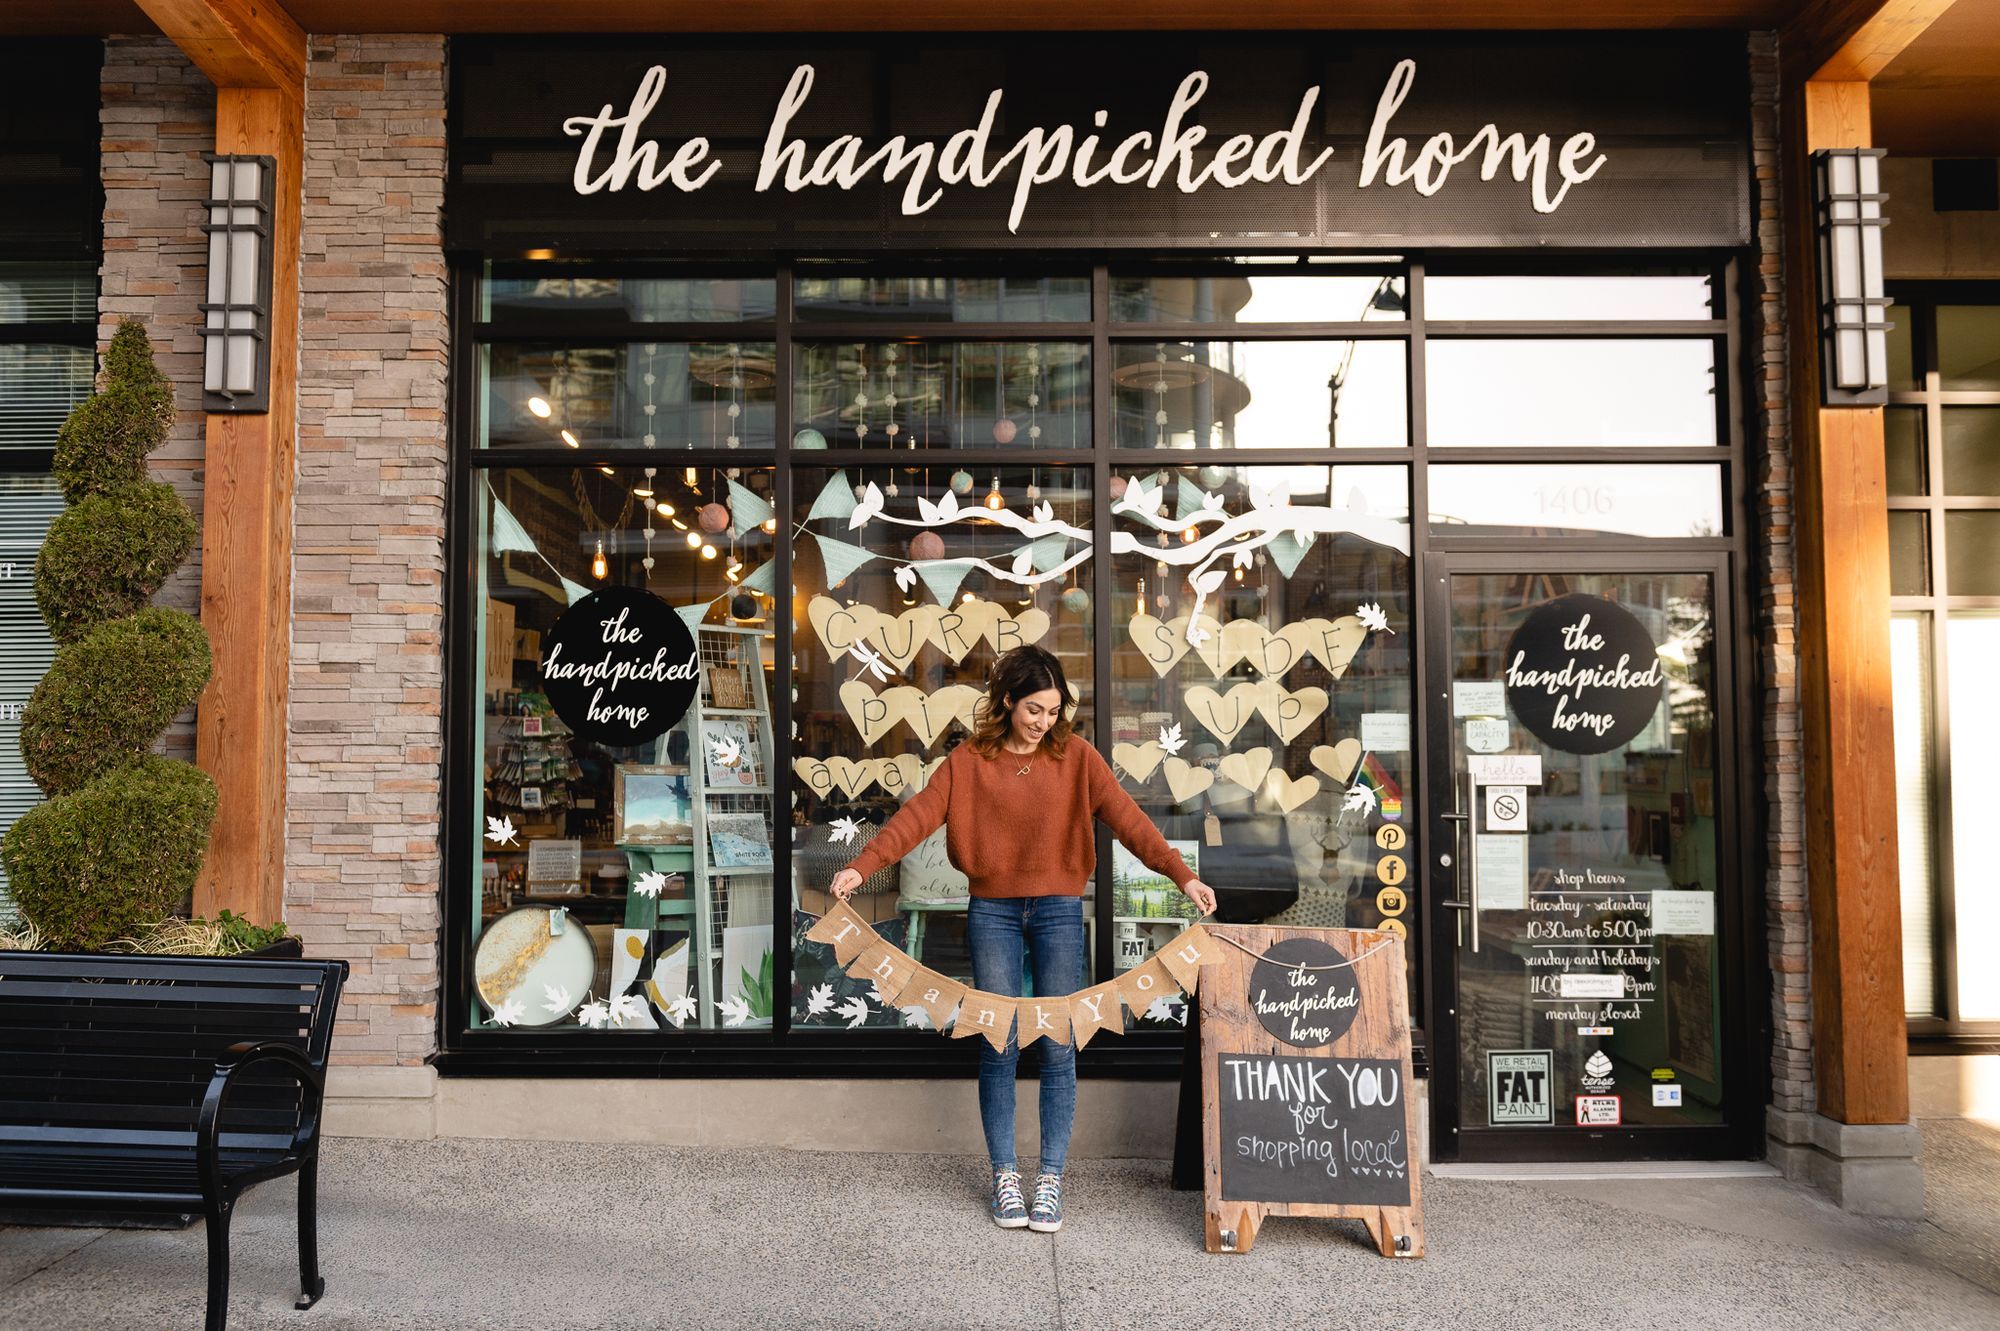 The storefront of The Handpicked Home, with owner Piya Sandhu standing in front holding a "thank you" banner.